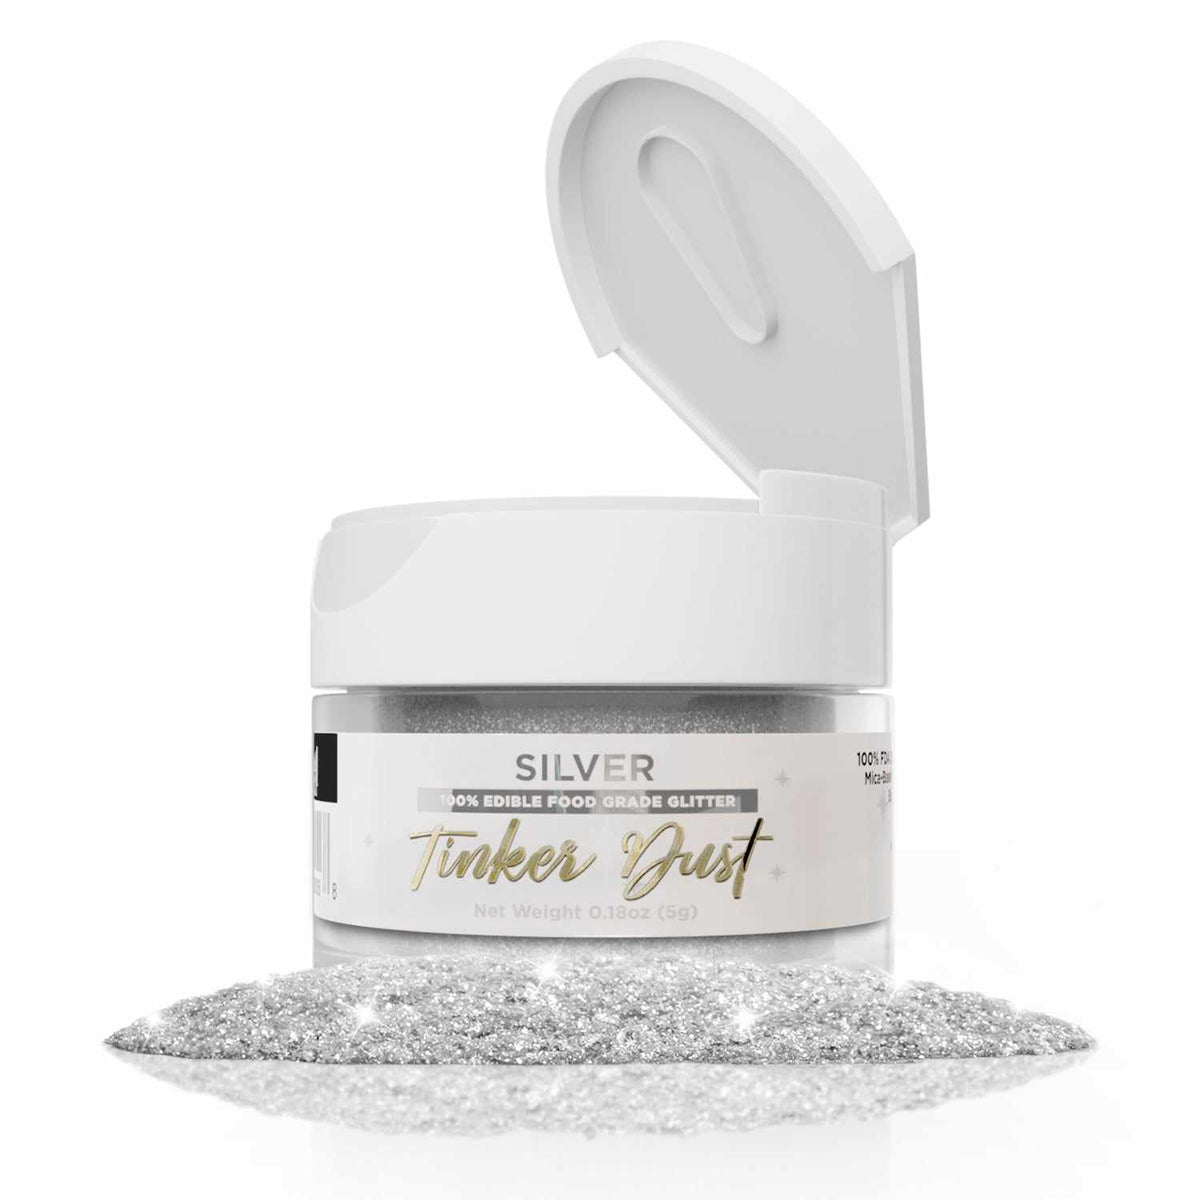 Silver Edible Tinker Dust  #1 Site for Edible Glitters & Dusts